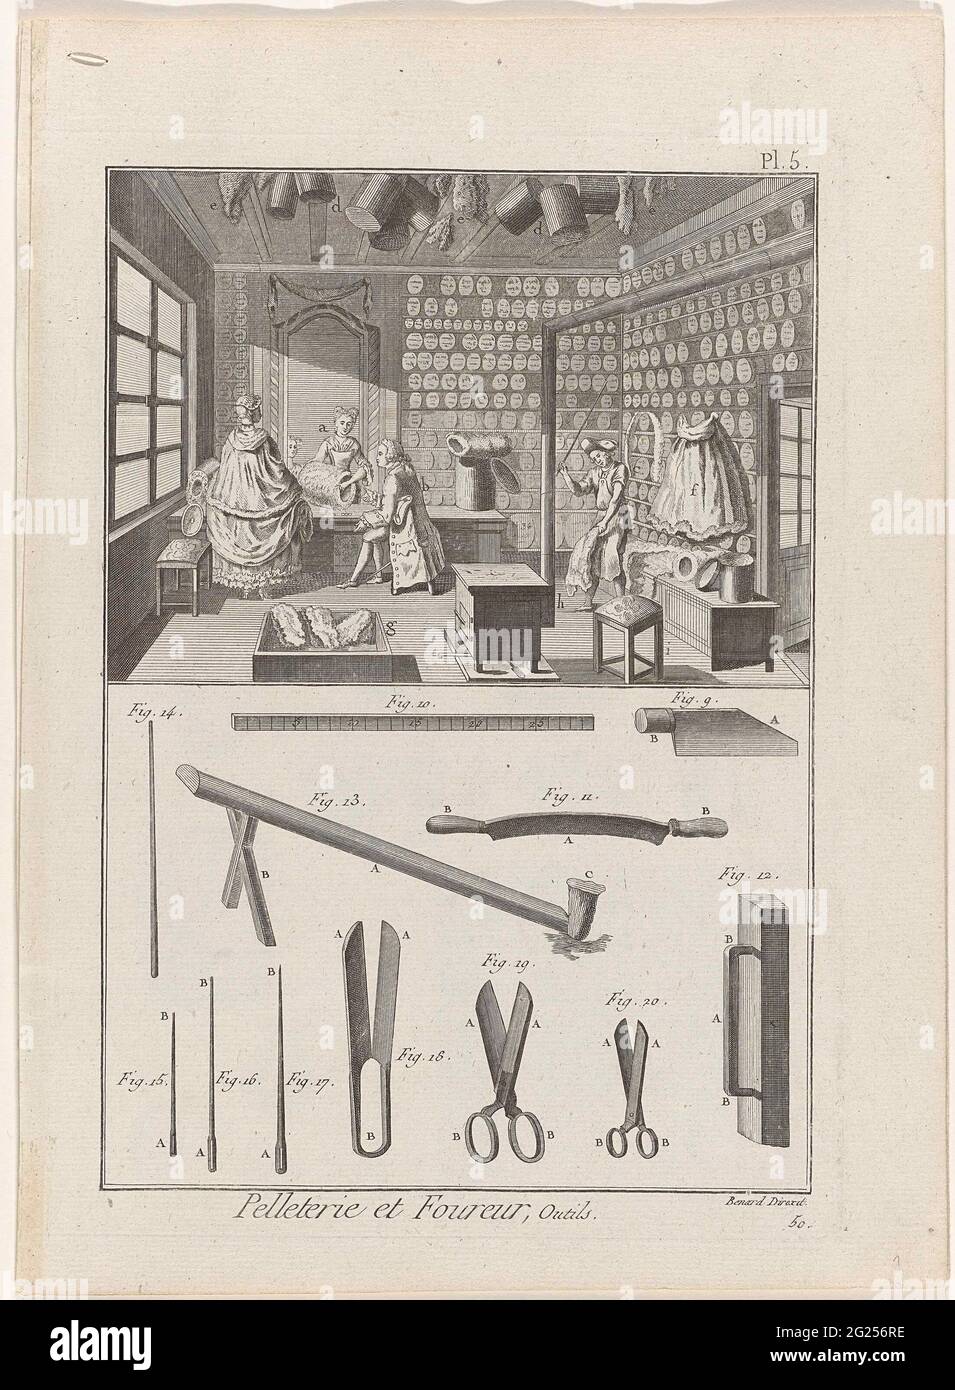 Pelleterie et Foureur, Outils; Encyclopédie De Diderot et d'Alembert  1751-1772. Atelier where fur is edited and Muffen and Capes made of fur.  Under the interior images of different tools. Pl. 5 From